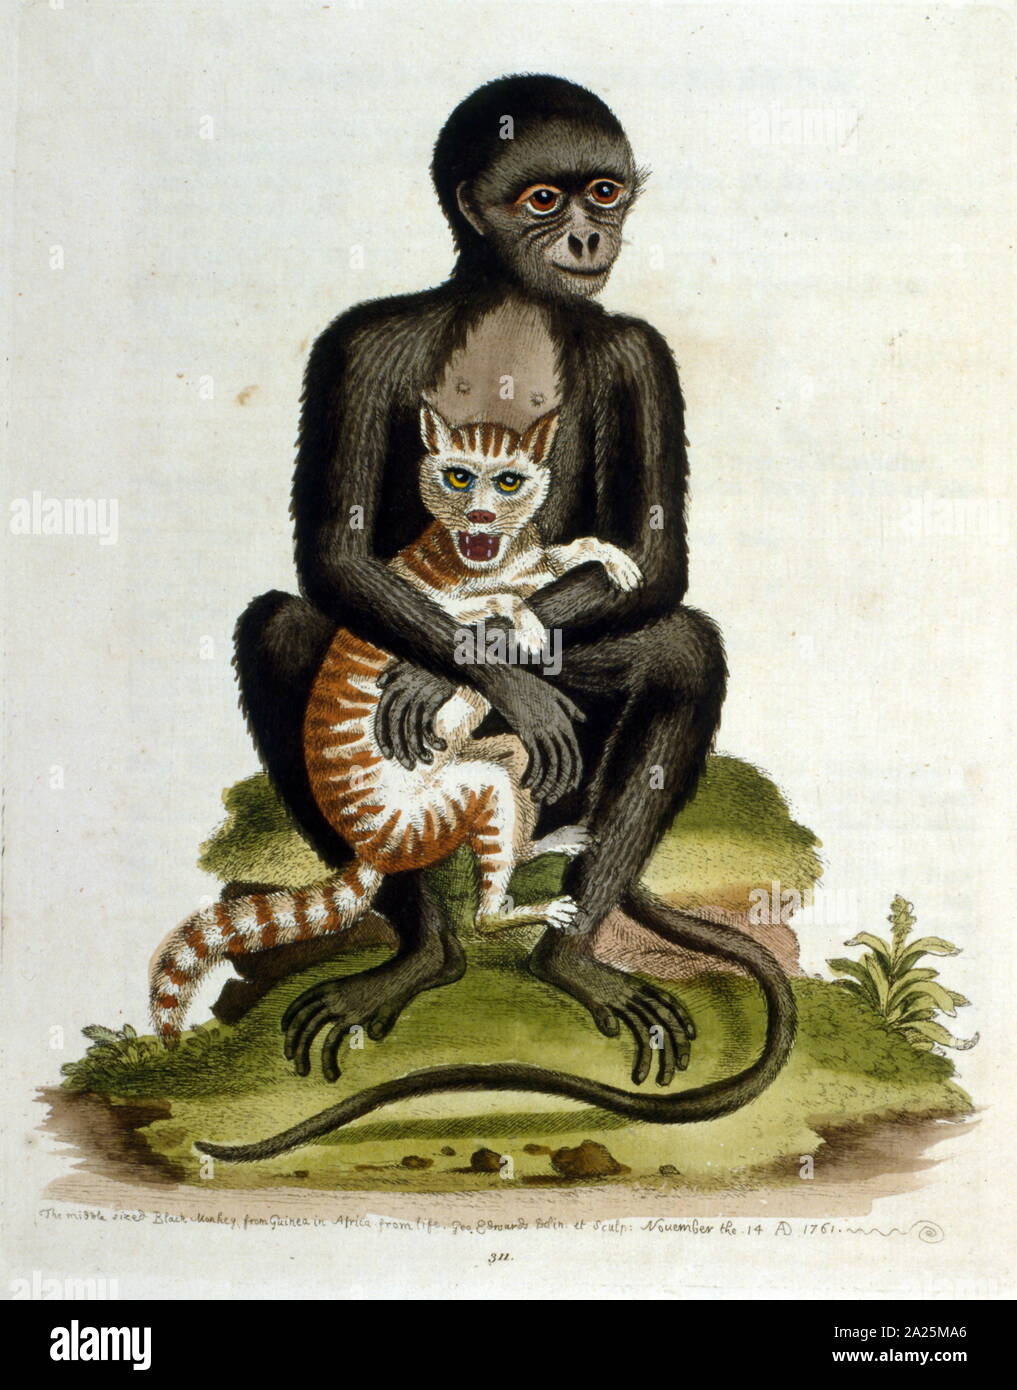 watercolour illustration of a black Monkey and a wild cat from a book by G Edwards 1758. George Edwards (1694-1773) was a British naturalist and ornithologist. He travelled extensively through Europe, studying natural history and birds in particular. Stock Photo